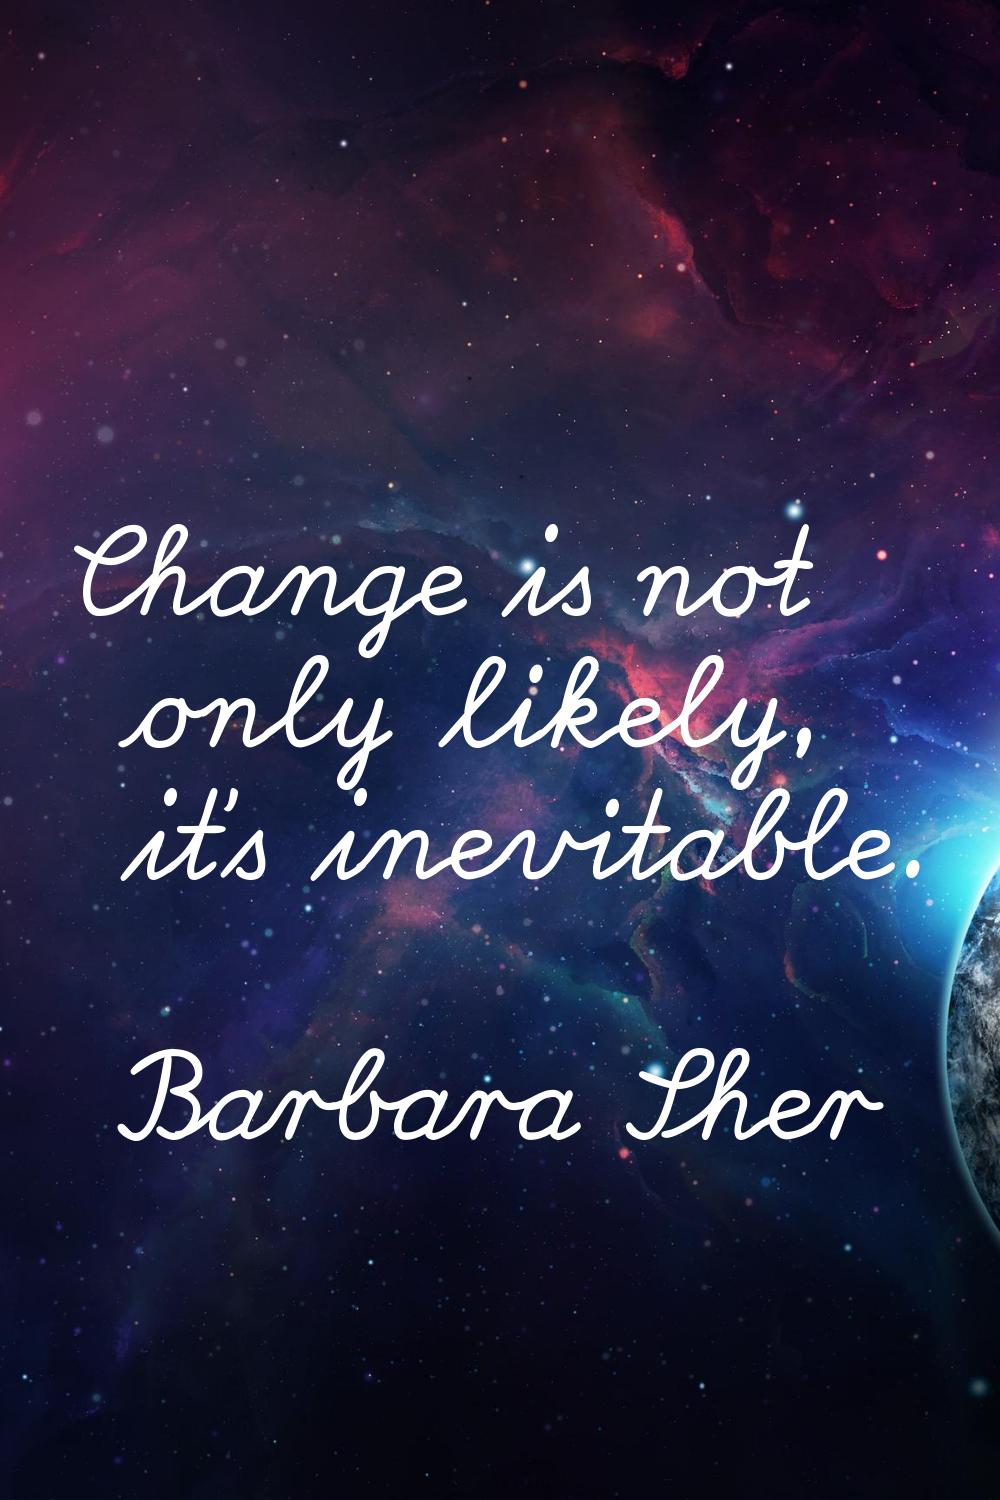 Change is not only likely, it's inevitable.